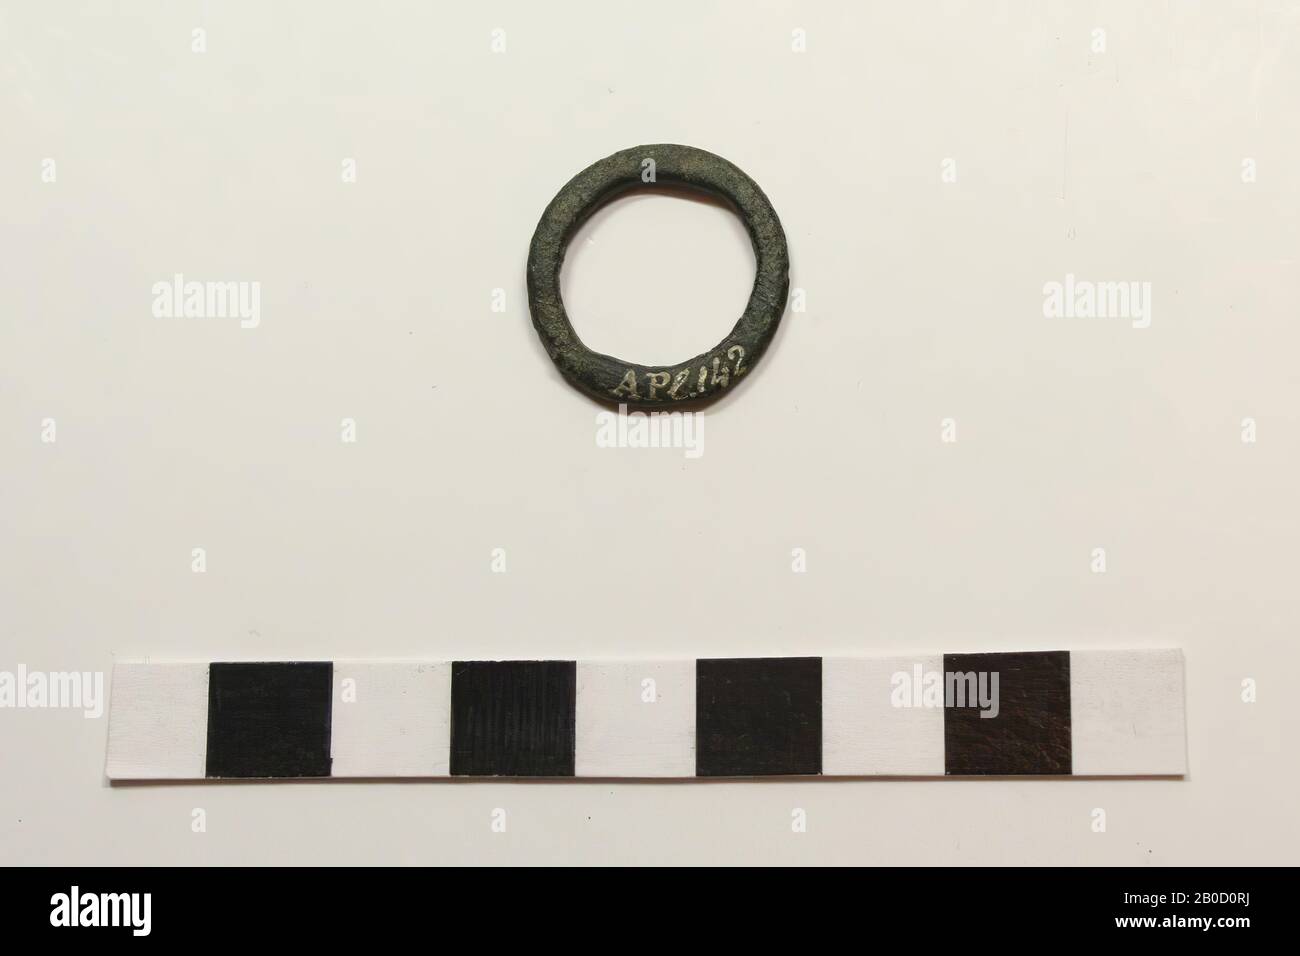 ring, metal, bronze, 2.1 x 2.0 x 0.1 cm, medieval, Germany, unknown, unknown, Andernach Stock Photo